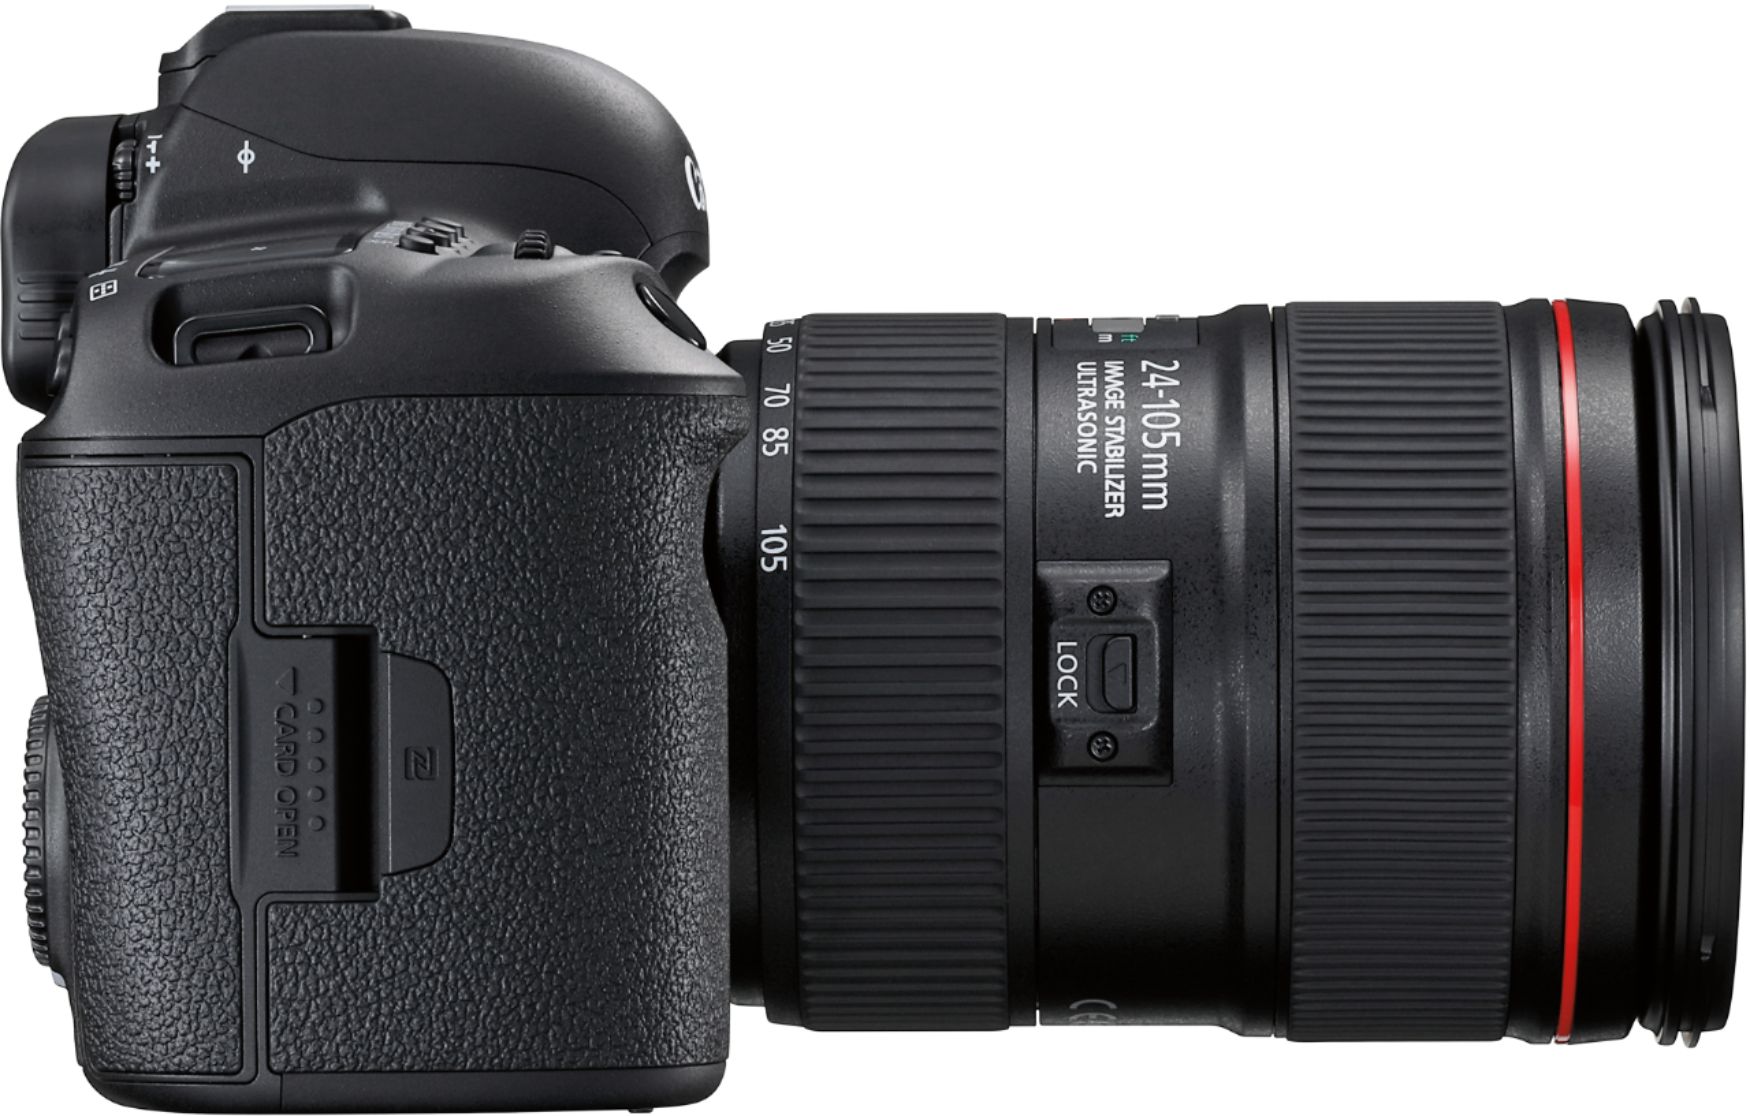 Canon EOS 5D Mark IV DSLR Camera with 24-105mm f/4L IS II USM Lens 